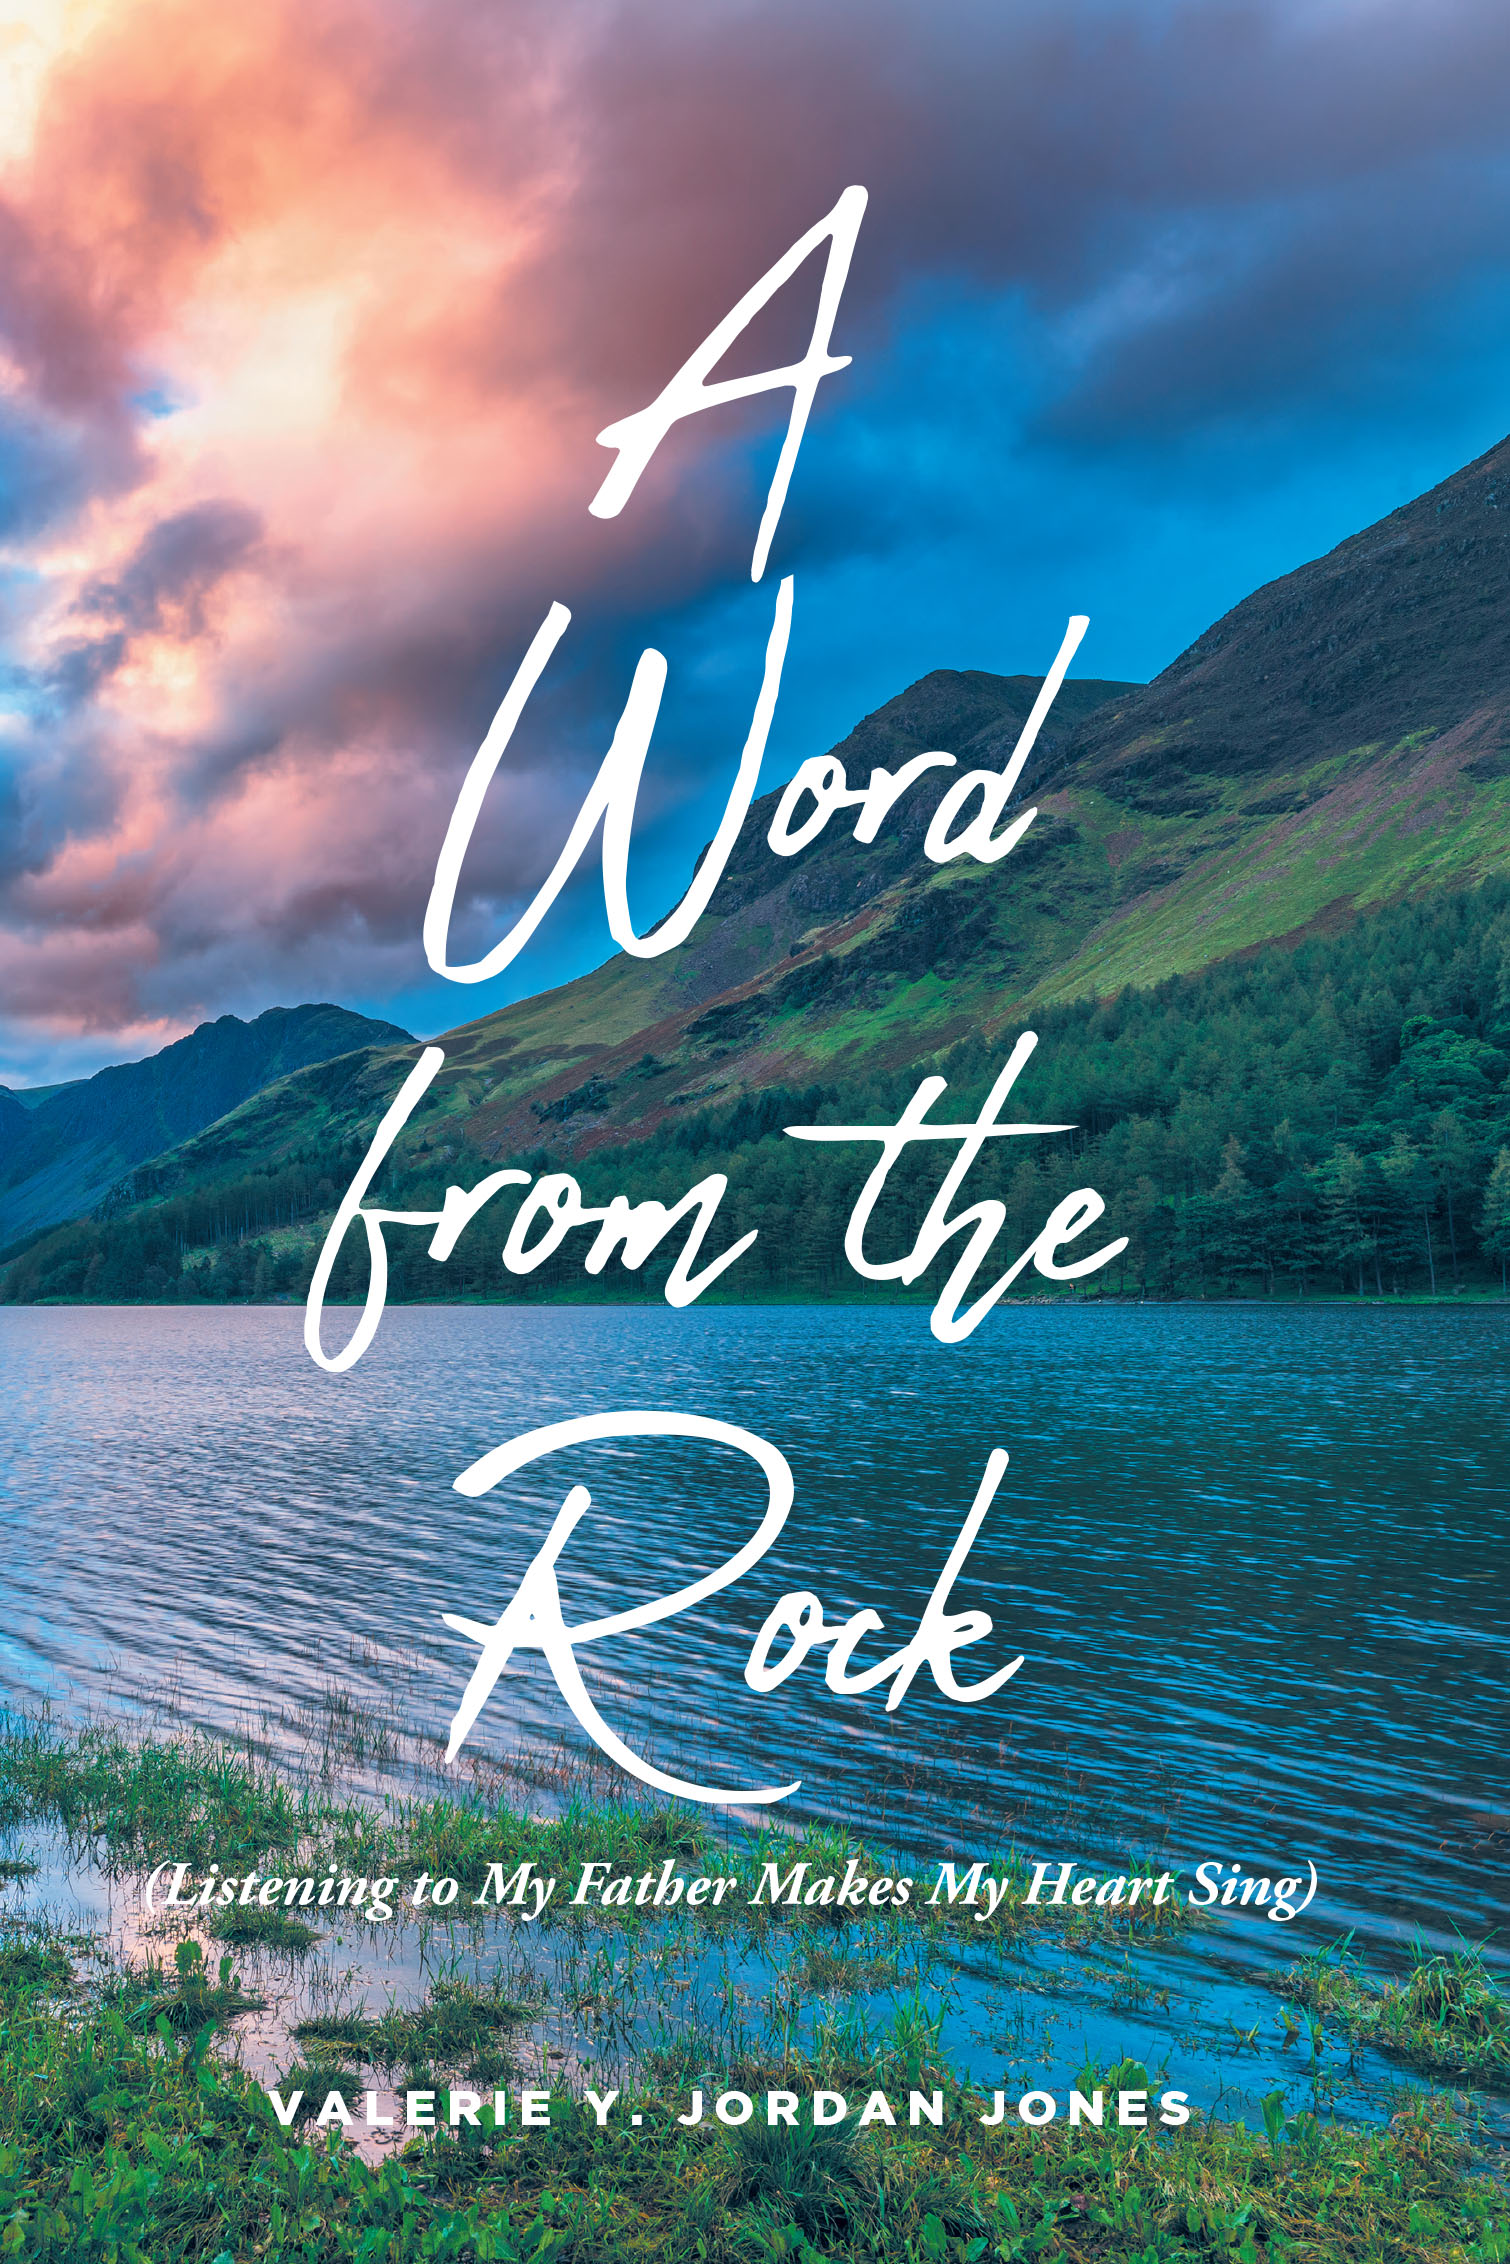 Author Valerie Y. Jordan Jones’s New Book "A Word from the Rock (Listening to My Father Makes My Heart Sing)" is a Collection of Divinely Spiritual Writings & Meditations